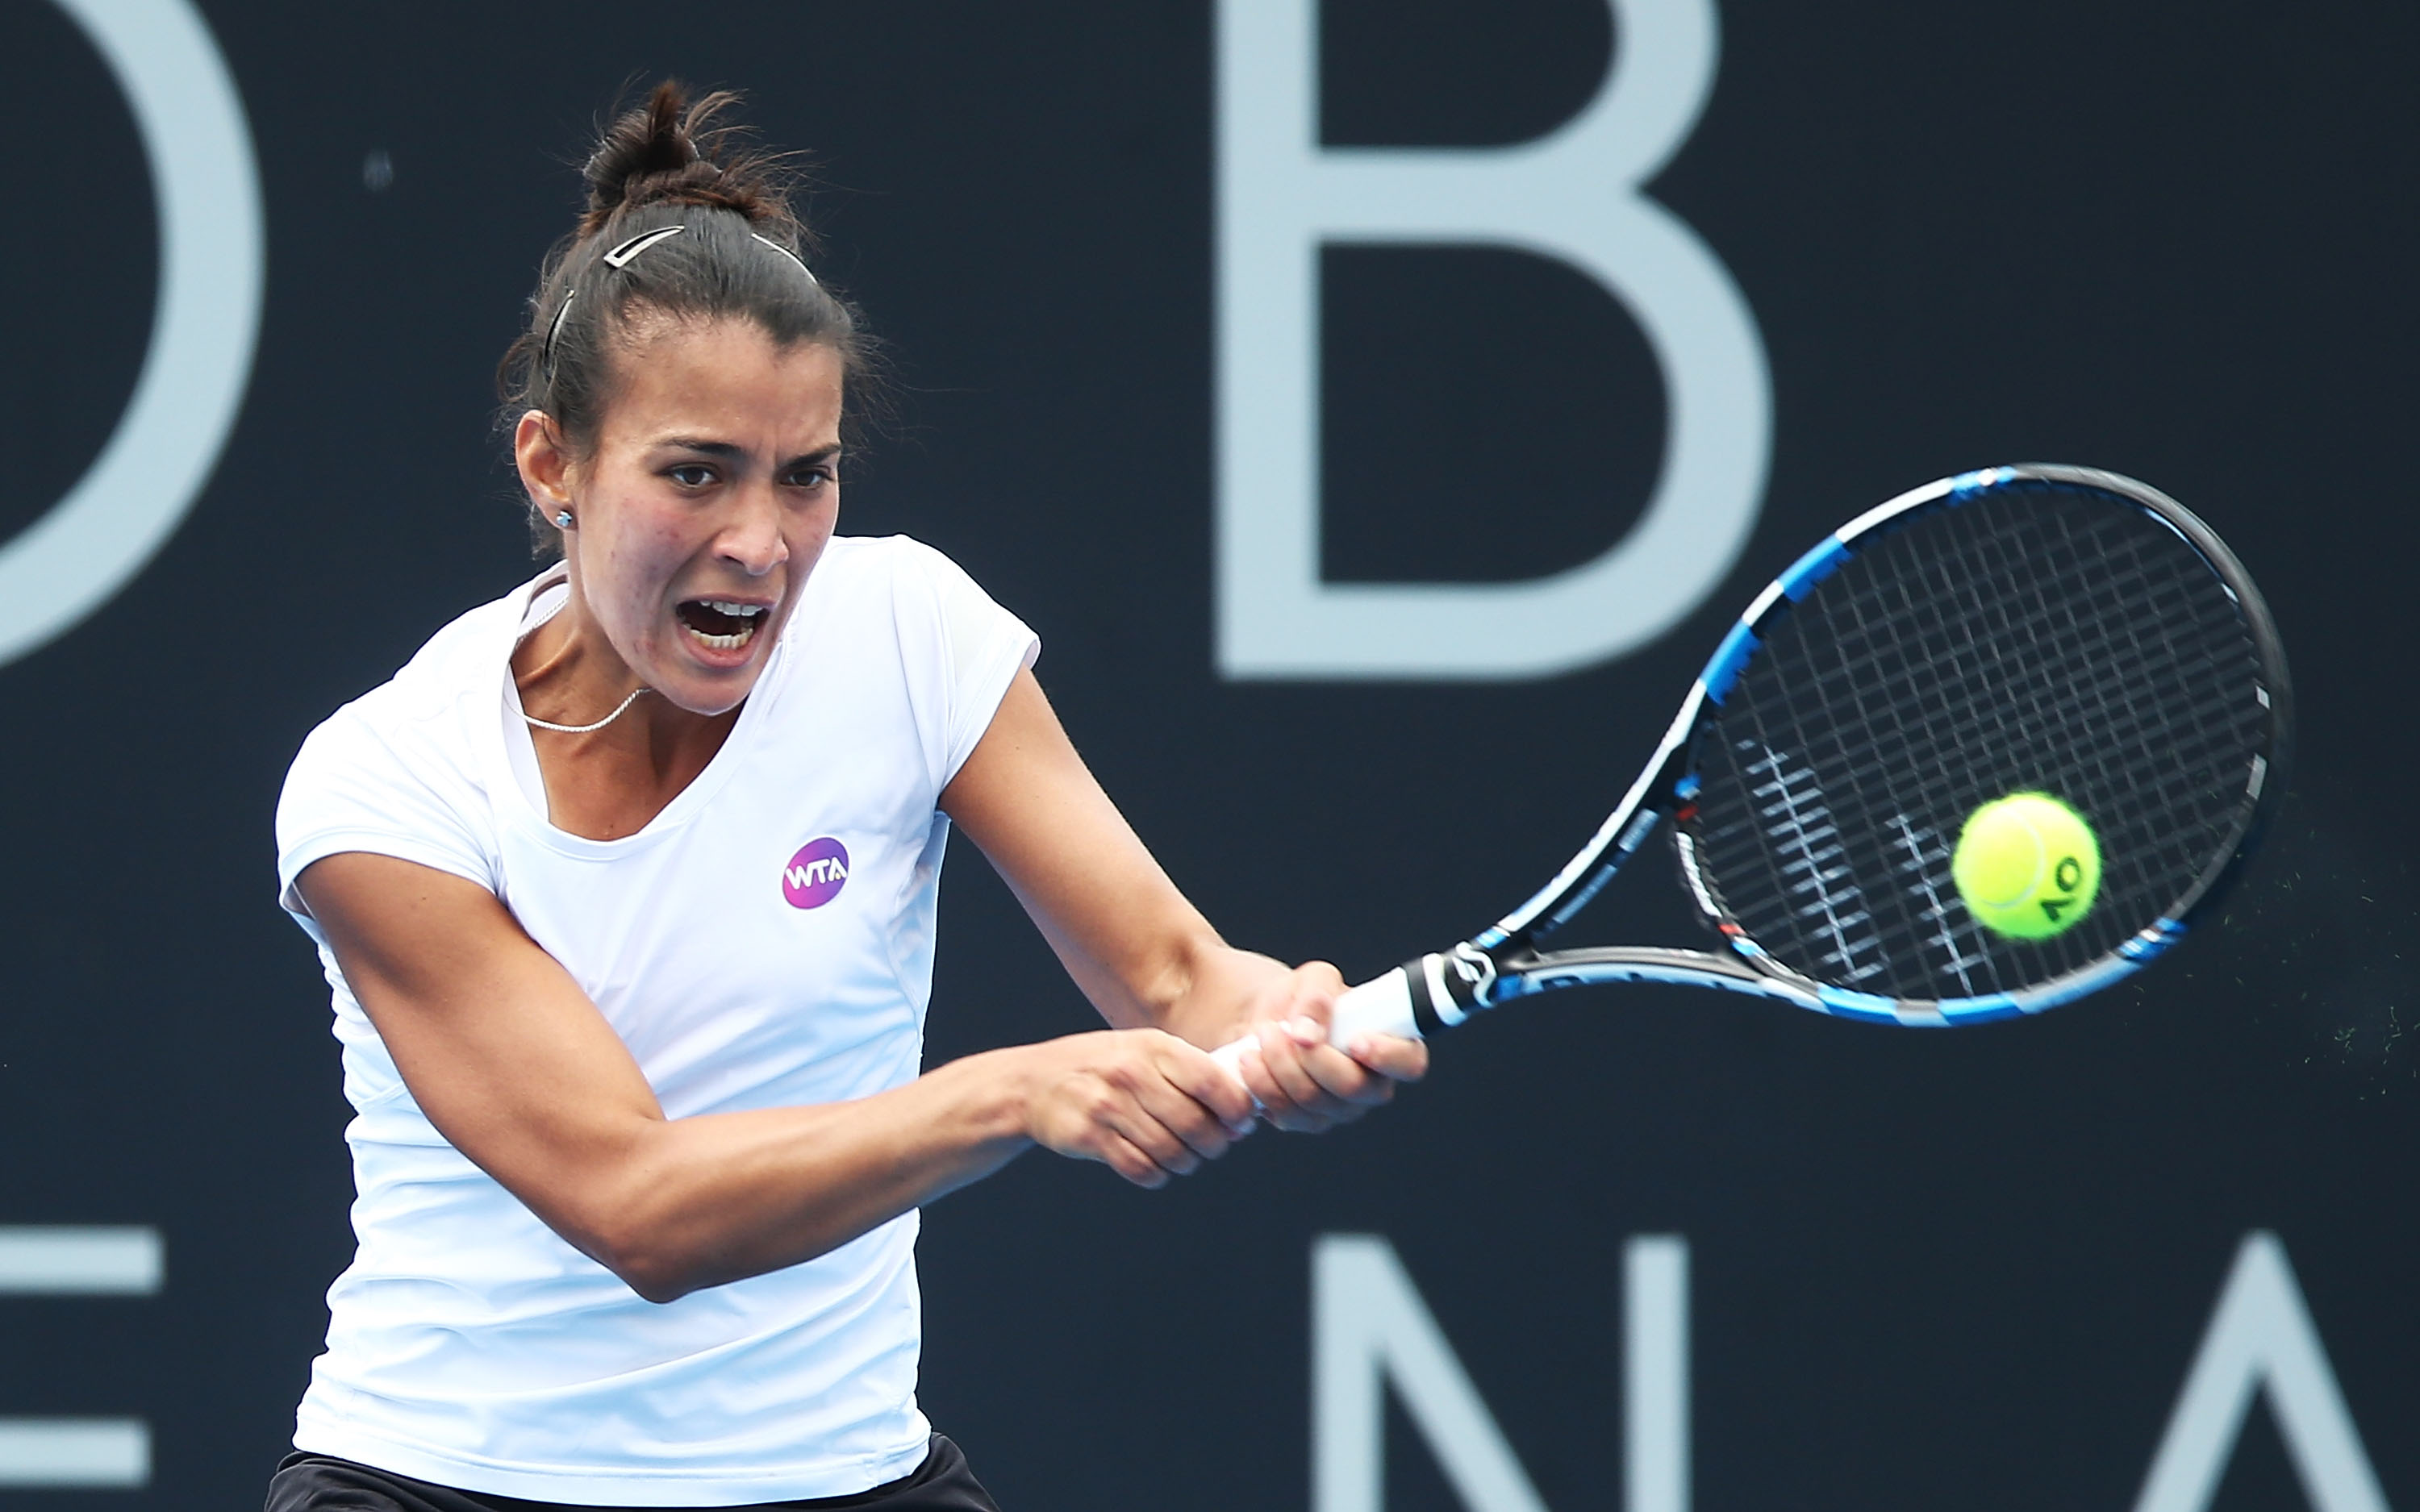 ON THE ATTACK:  Veronica Cepede Royg slams a backhand in her second round match; Getty Images